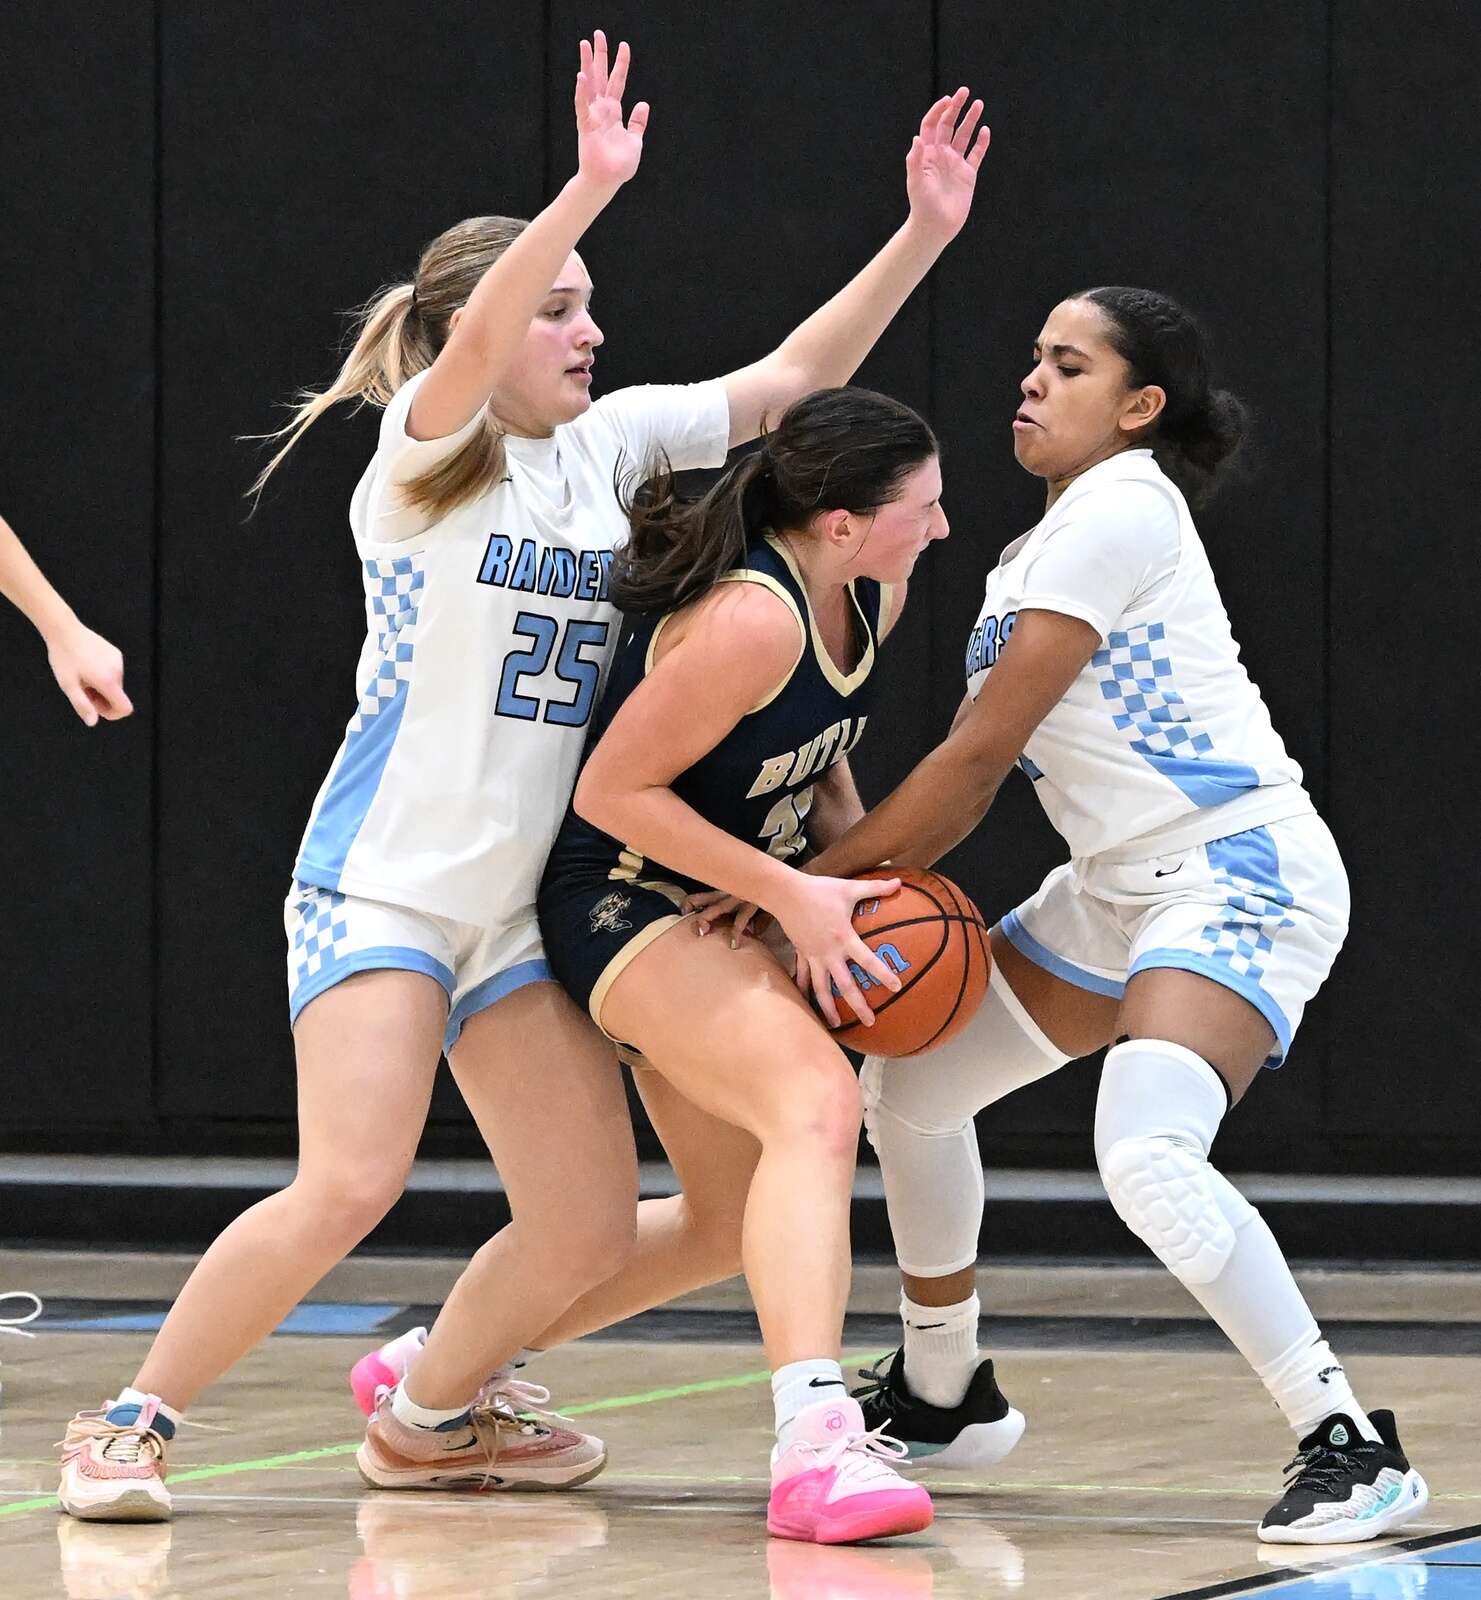 Seneca Valley’s Brooke Dufford and Makayla Canty fight for a ball against Butler’s Amelia McMichael